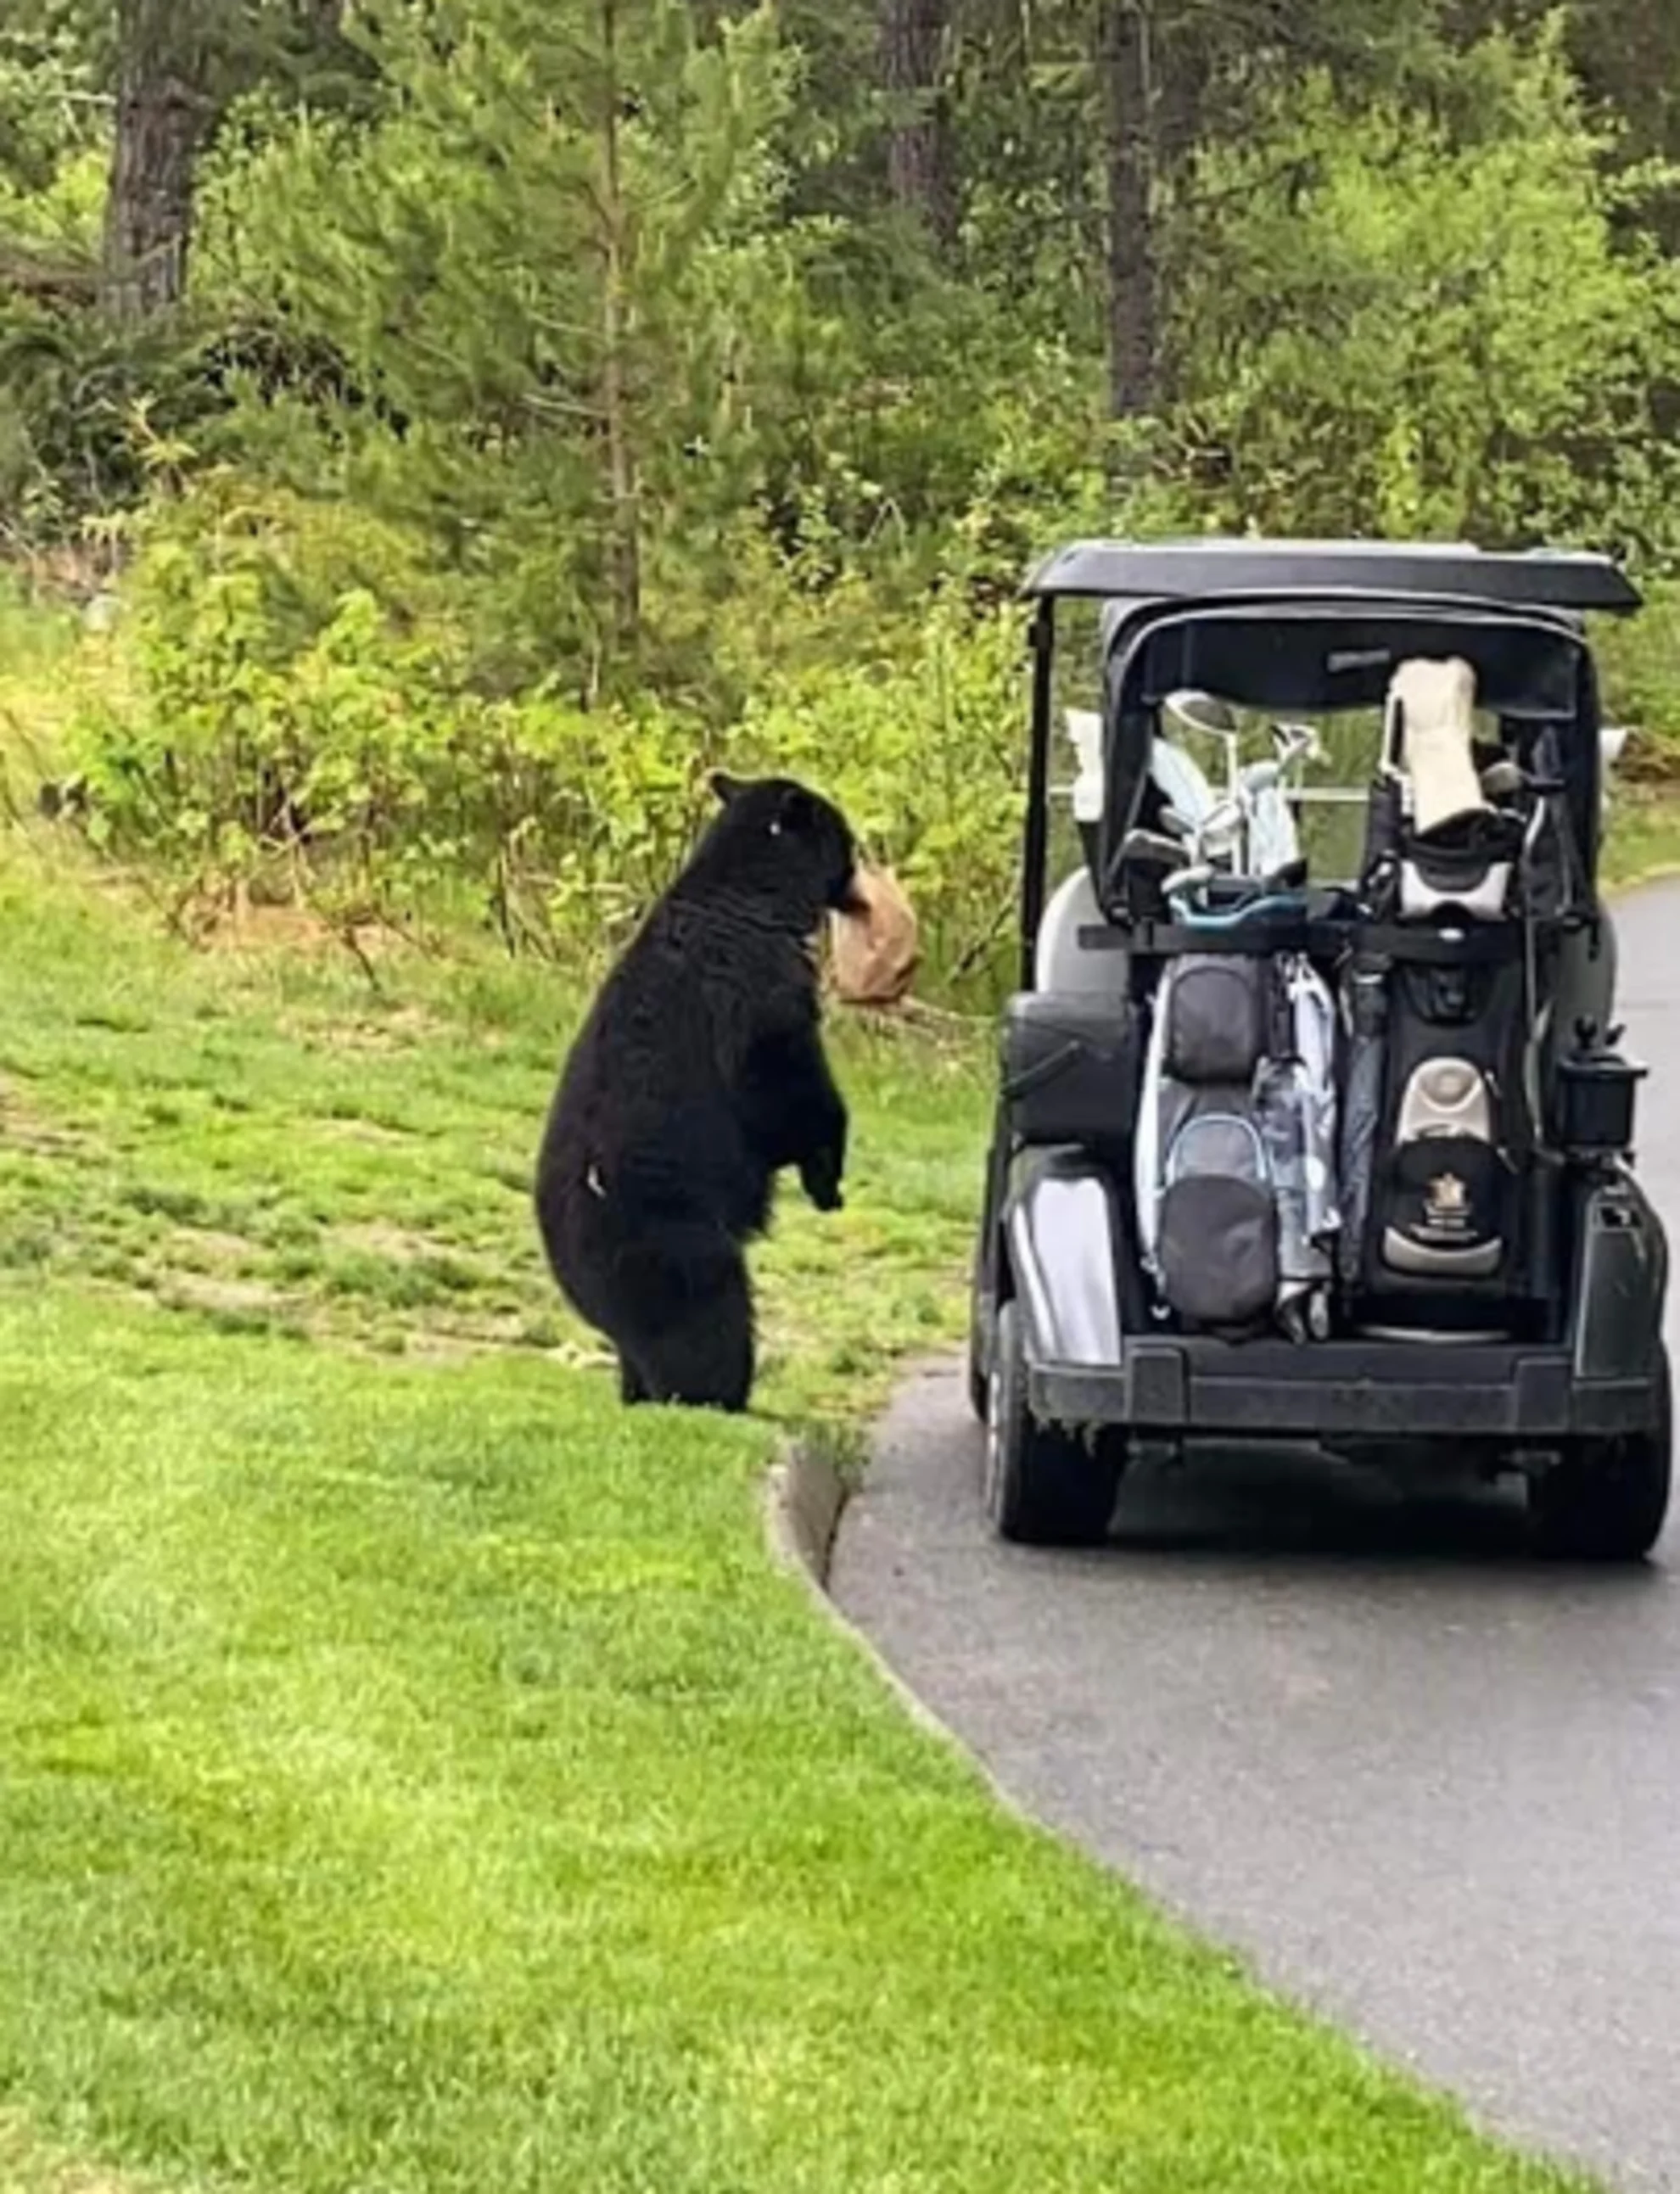 A bear in B.C. makes a name for itself as the "lunch bandit" on a popular golf course. See why, here